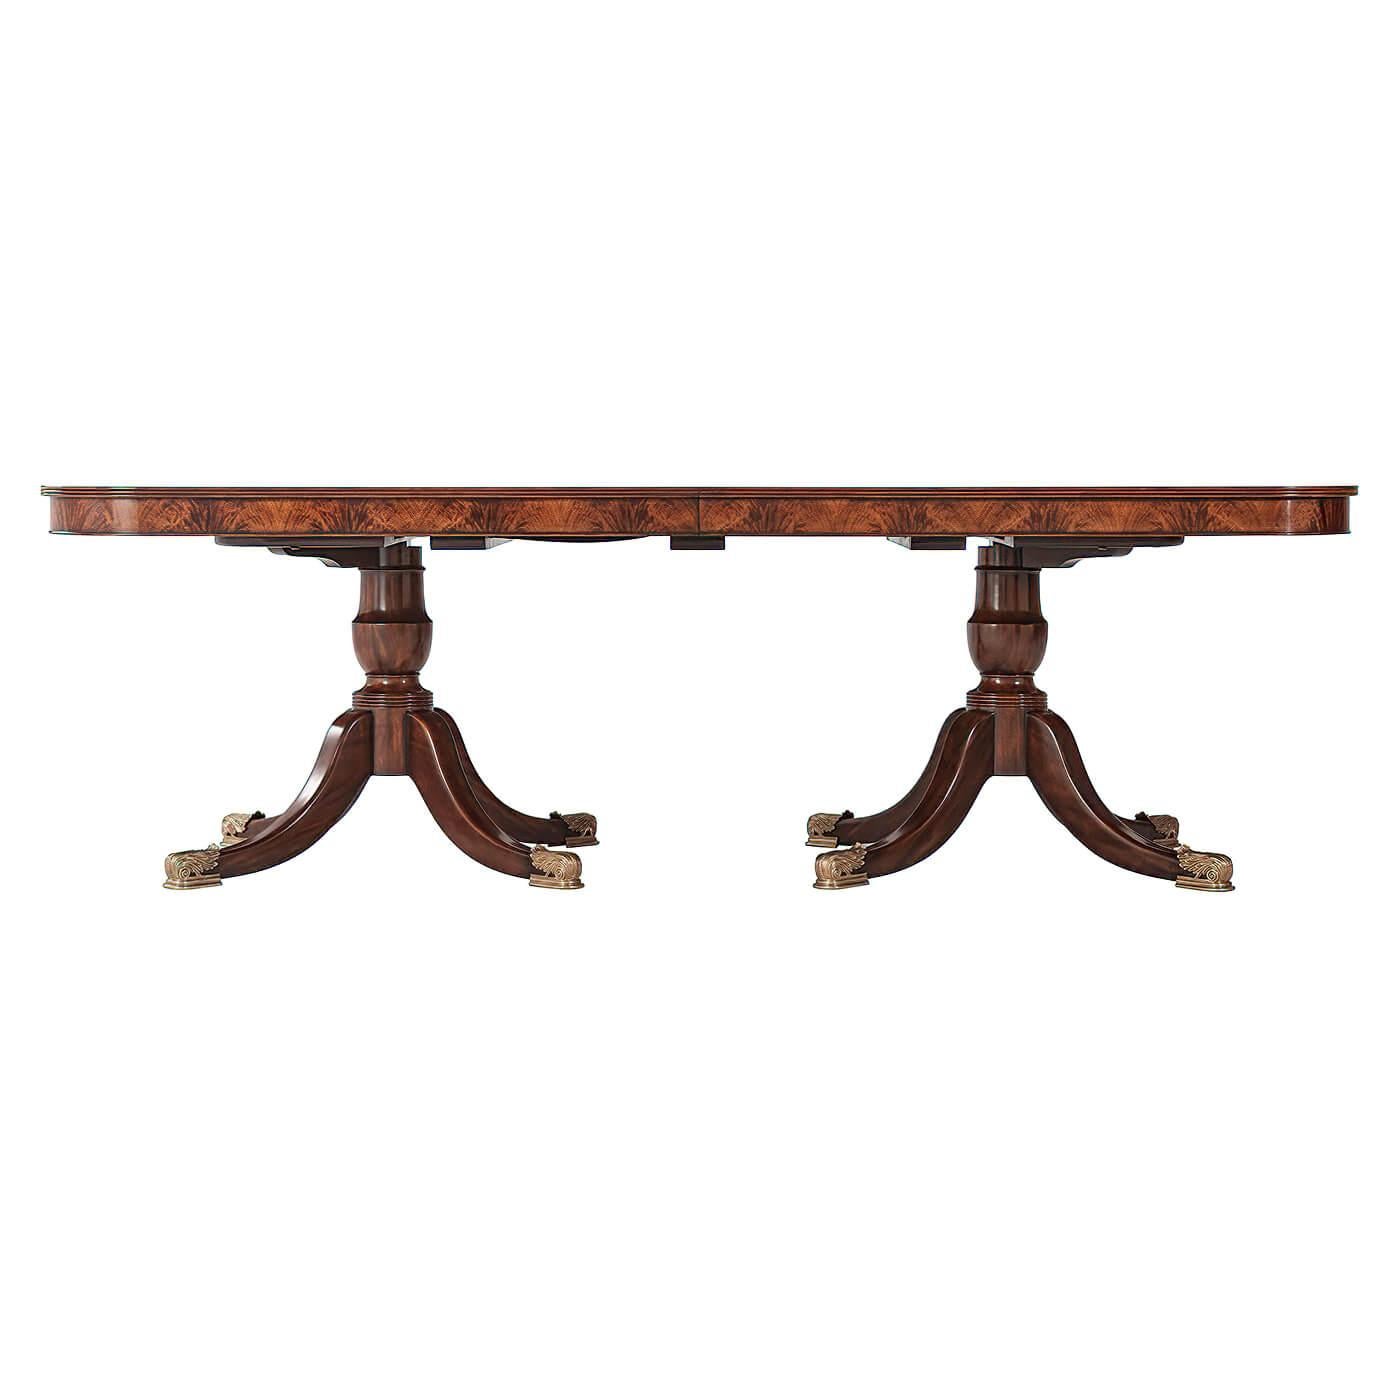 Vietnamese Regency Style Mahogany Dining Table For Sale